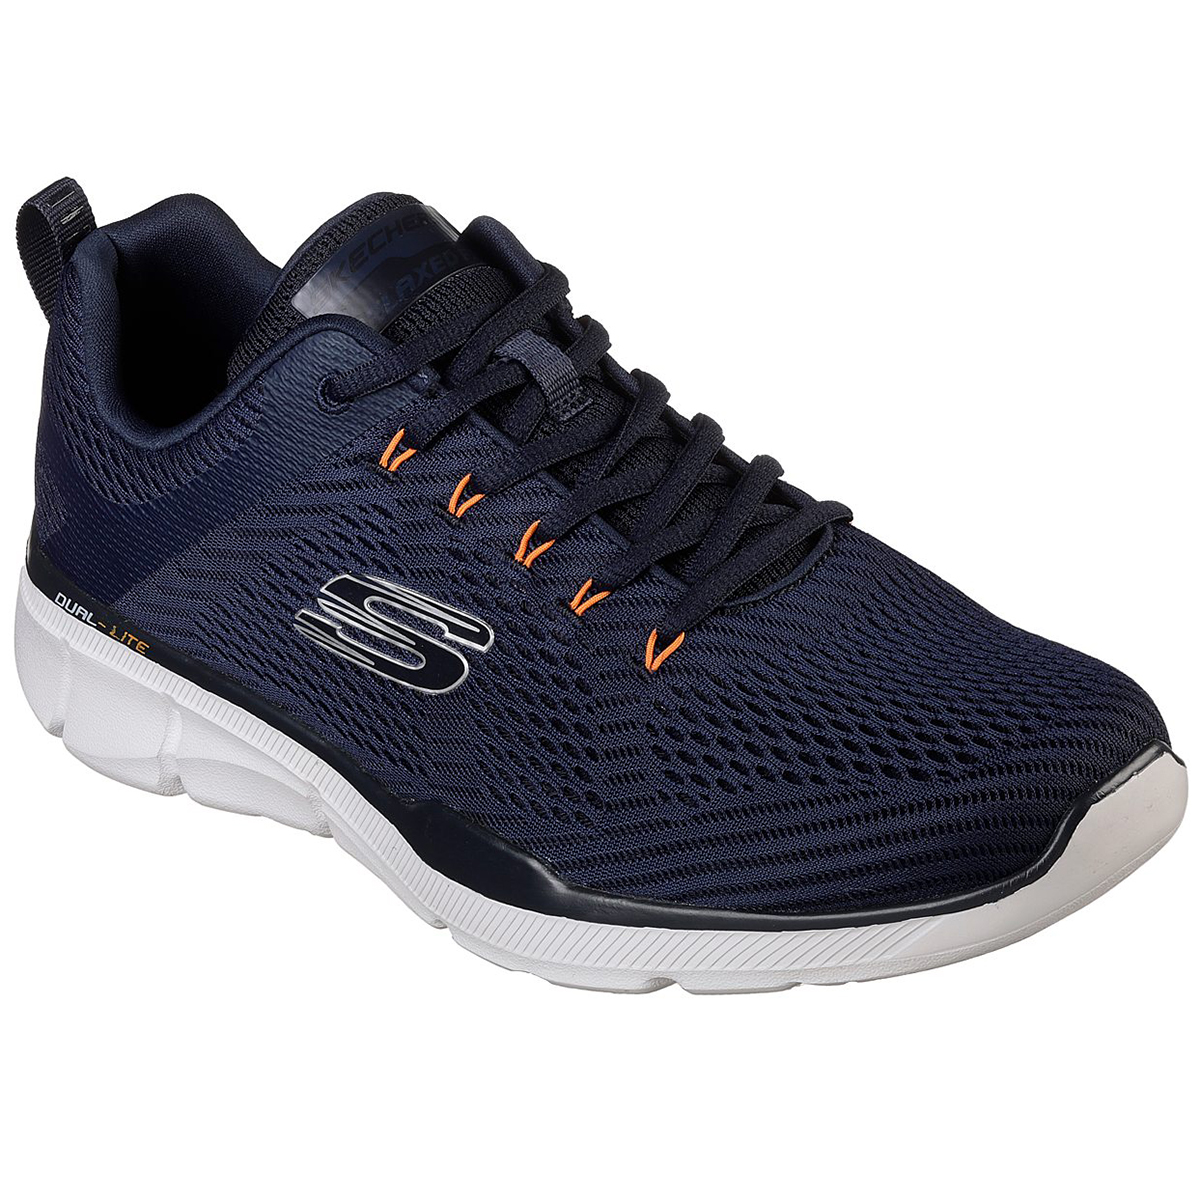 Skechers Men's Relaxed Fit: Equalizer 3.0 Sneakers, Extra Wide - Blue, 10.5